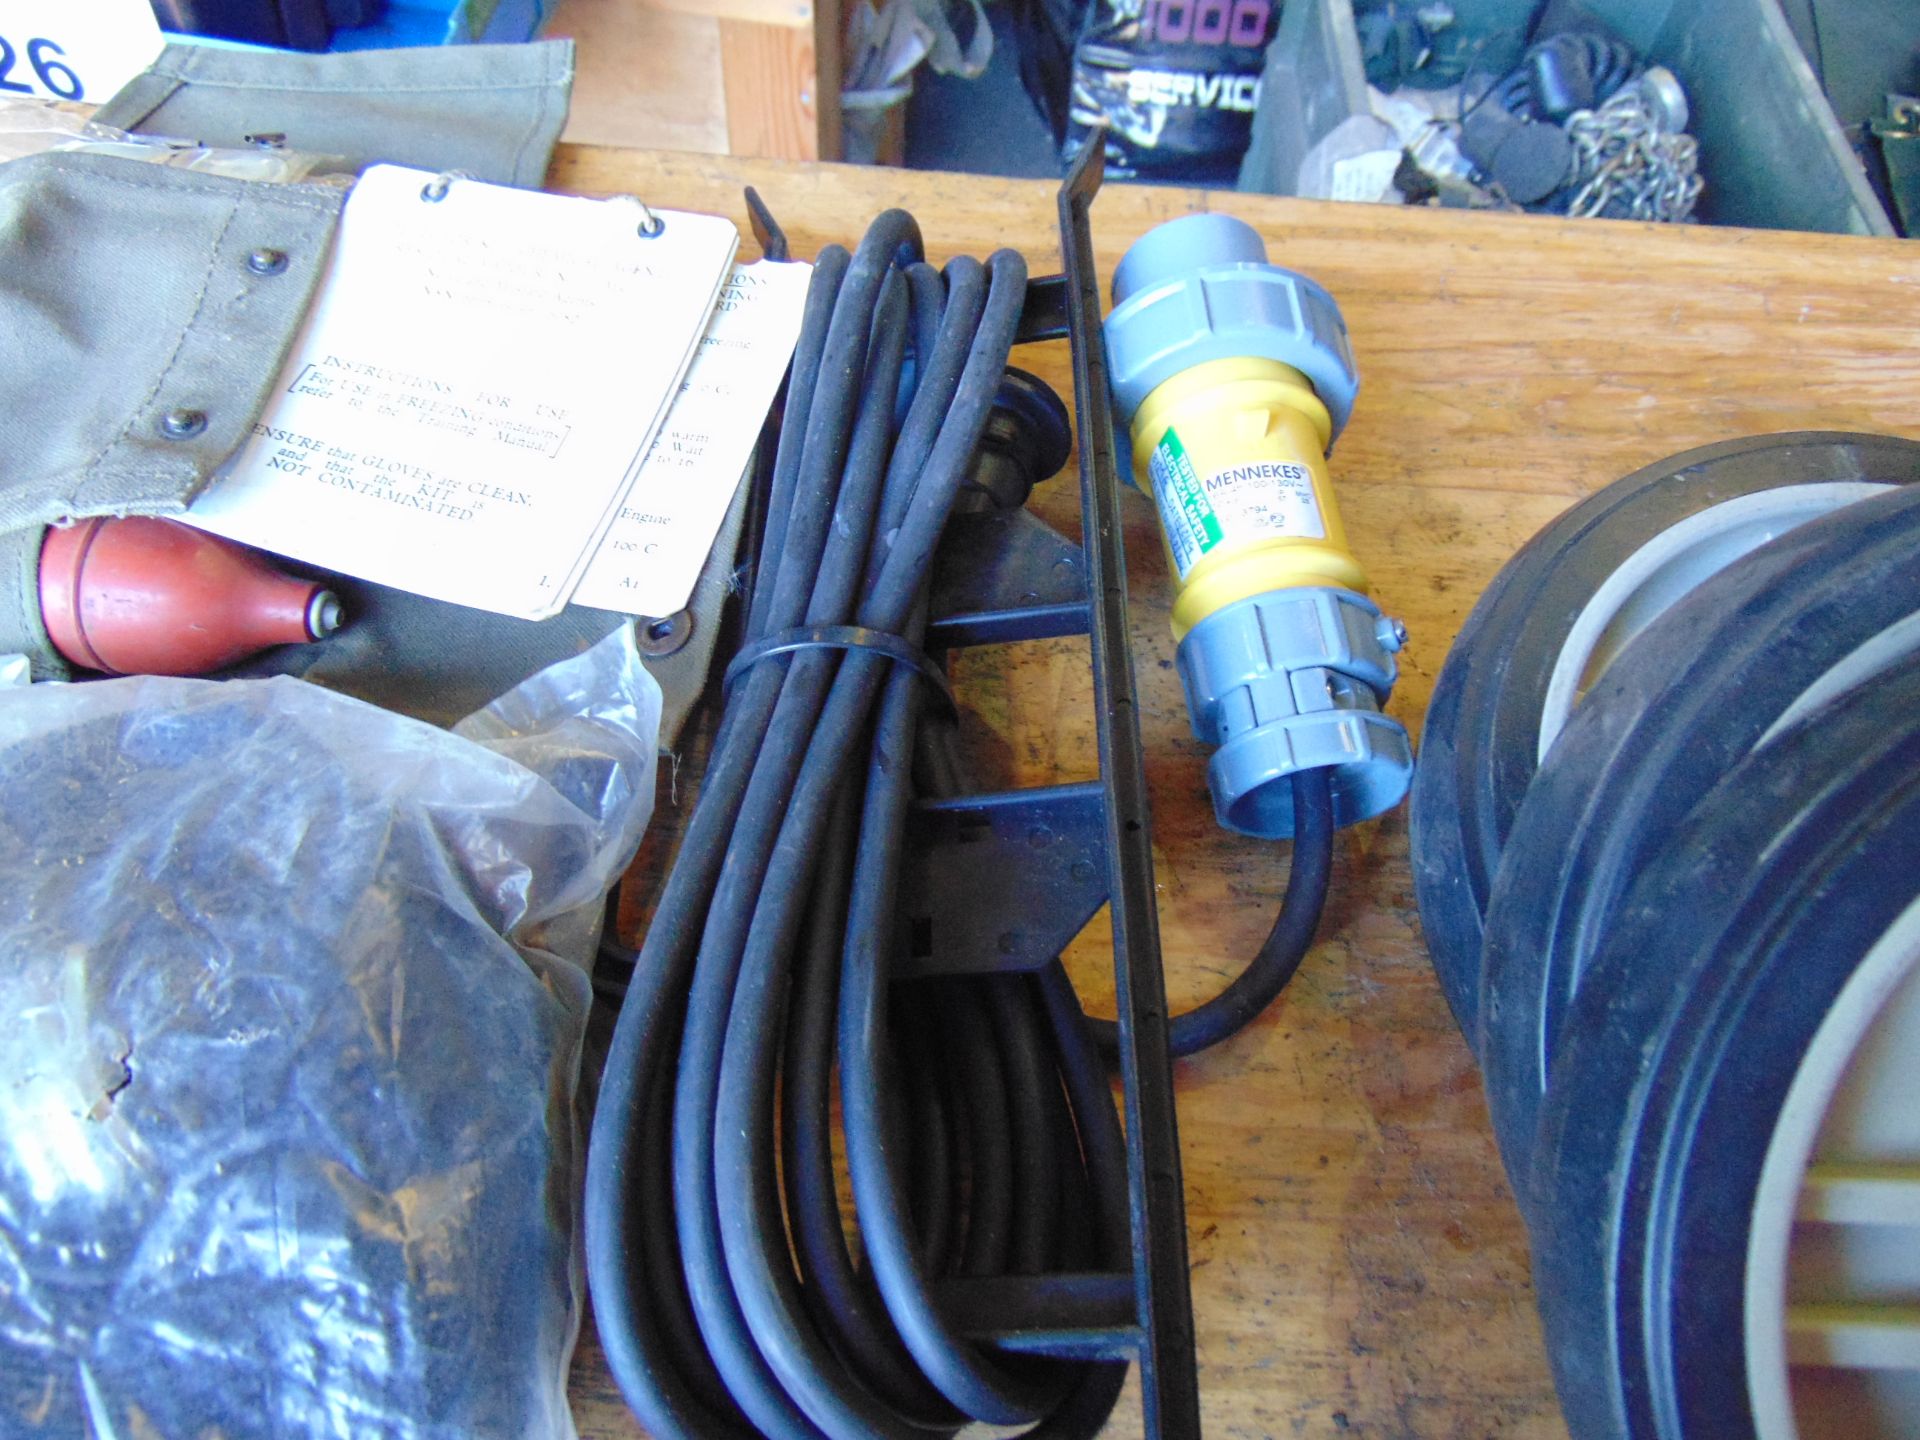 Wheels, Ext Lead, Straps, Chemical Agent Test Kit - Image 3 of 6